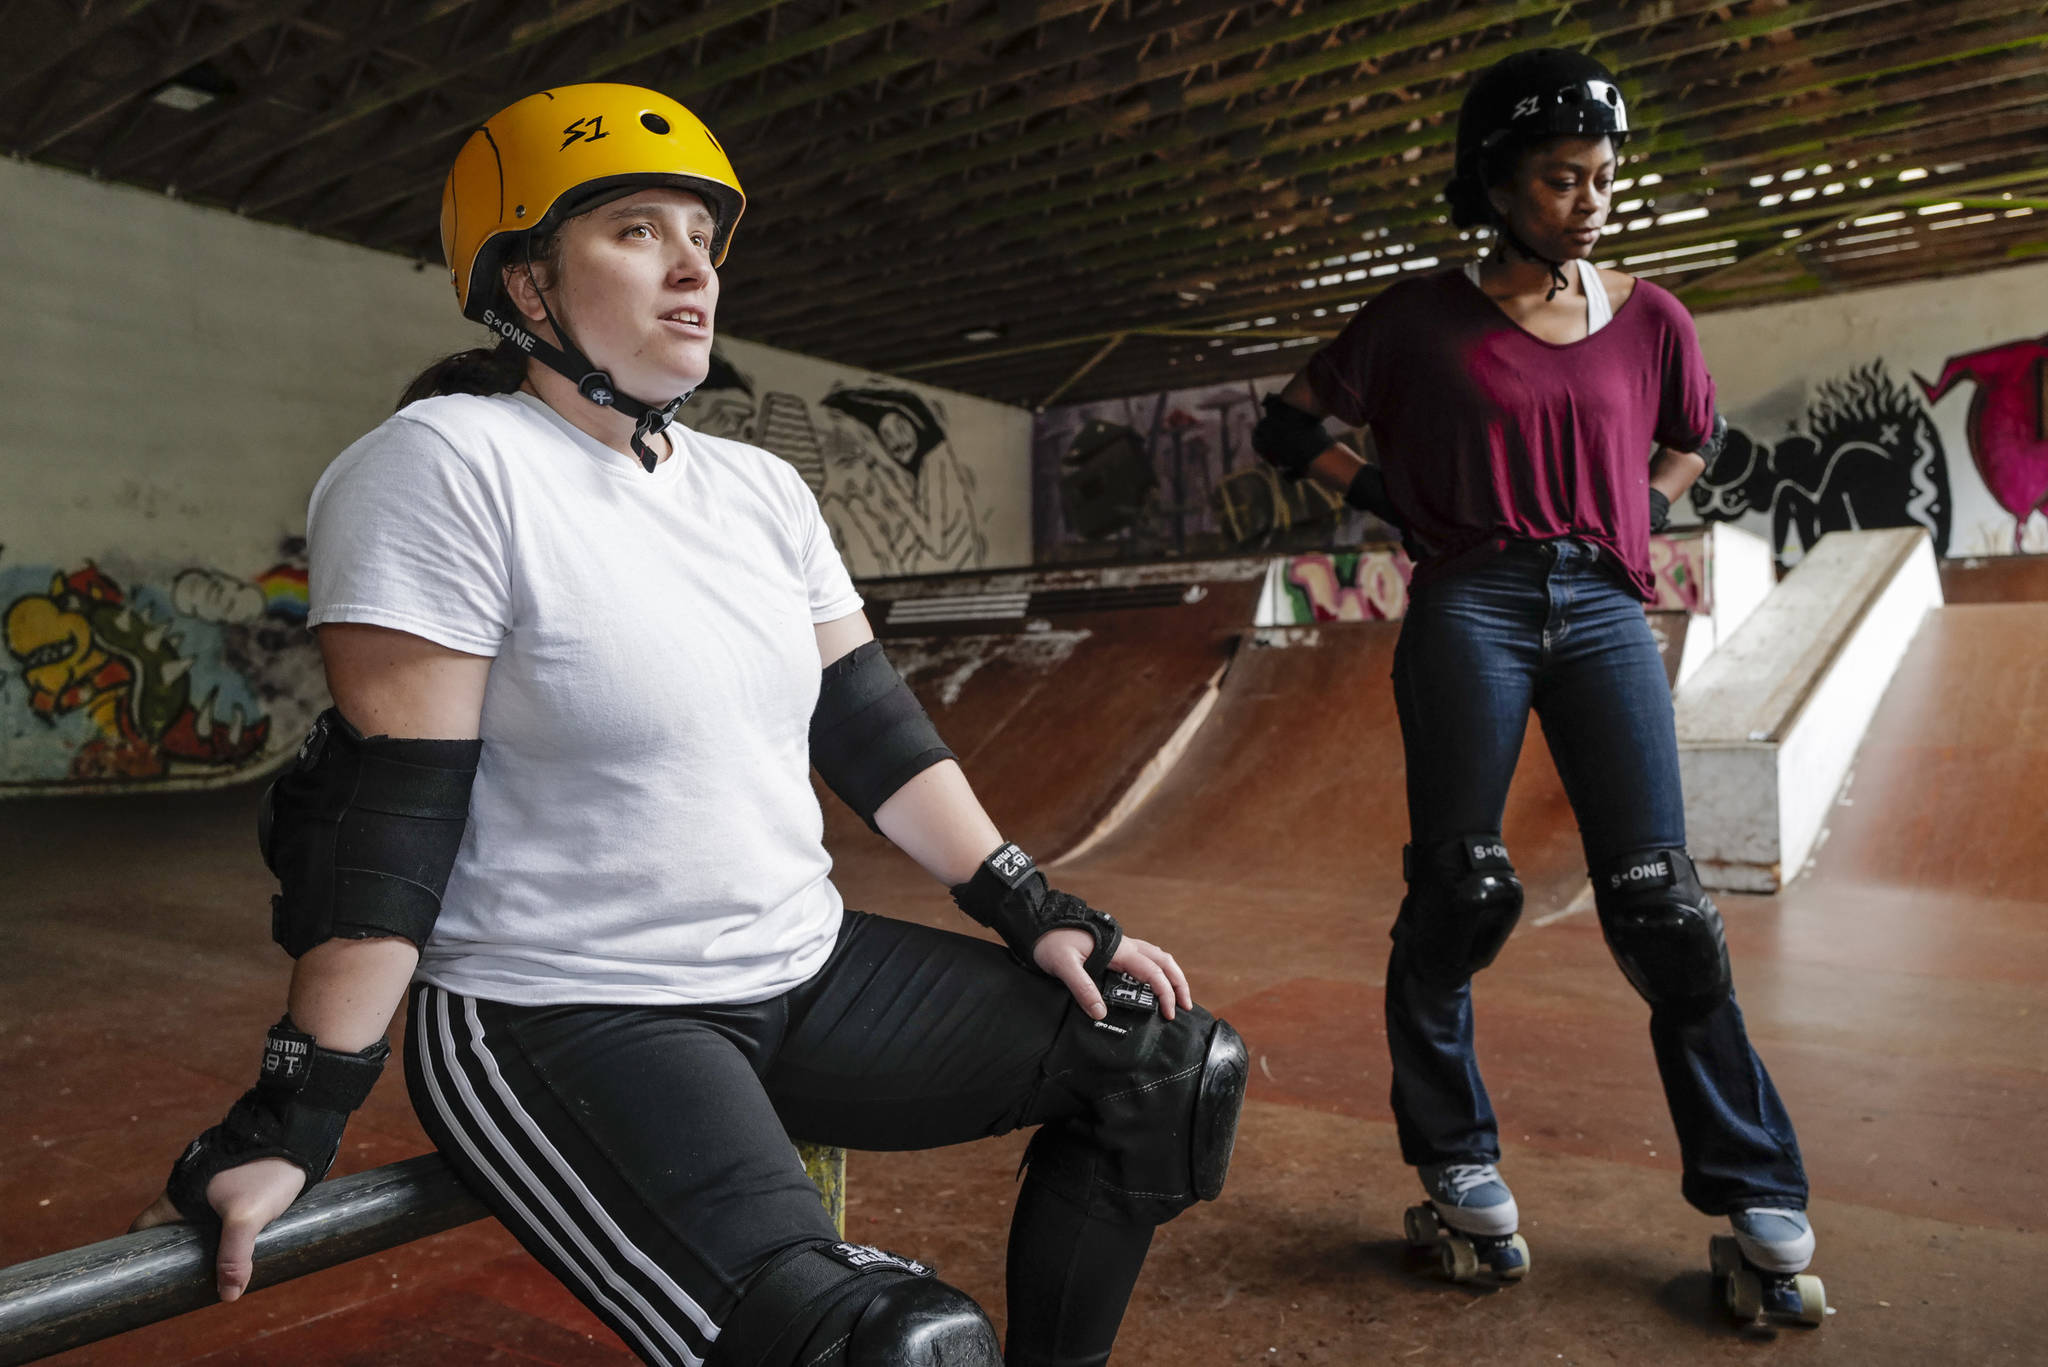 Shabadrang Khalsa, left, and Jennifer Gross, who skate with the Juneau Rollergirls, talk about what rollerskating means to them during a break getting their daily skate in at the Pipeline Skate Park on Friday, Oct. 11, 2019. The two are skating everyday as part of a challenge to everyday for a year. (Michael Penn | Juneau Empire)